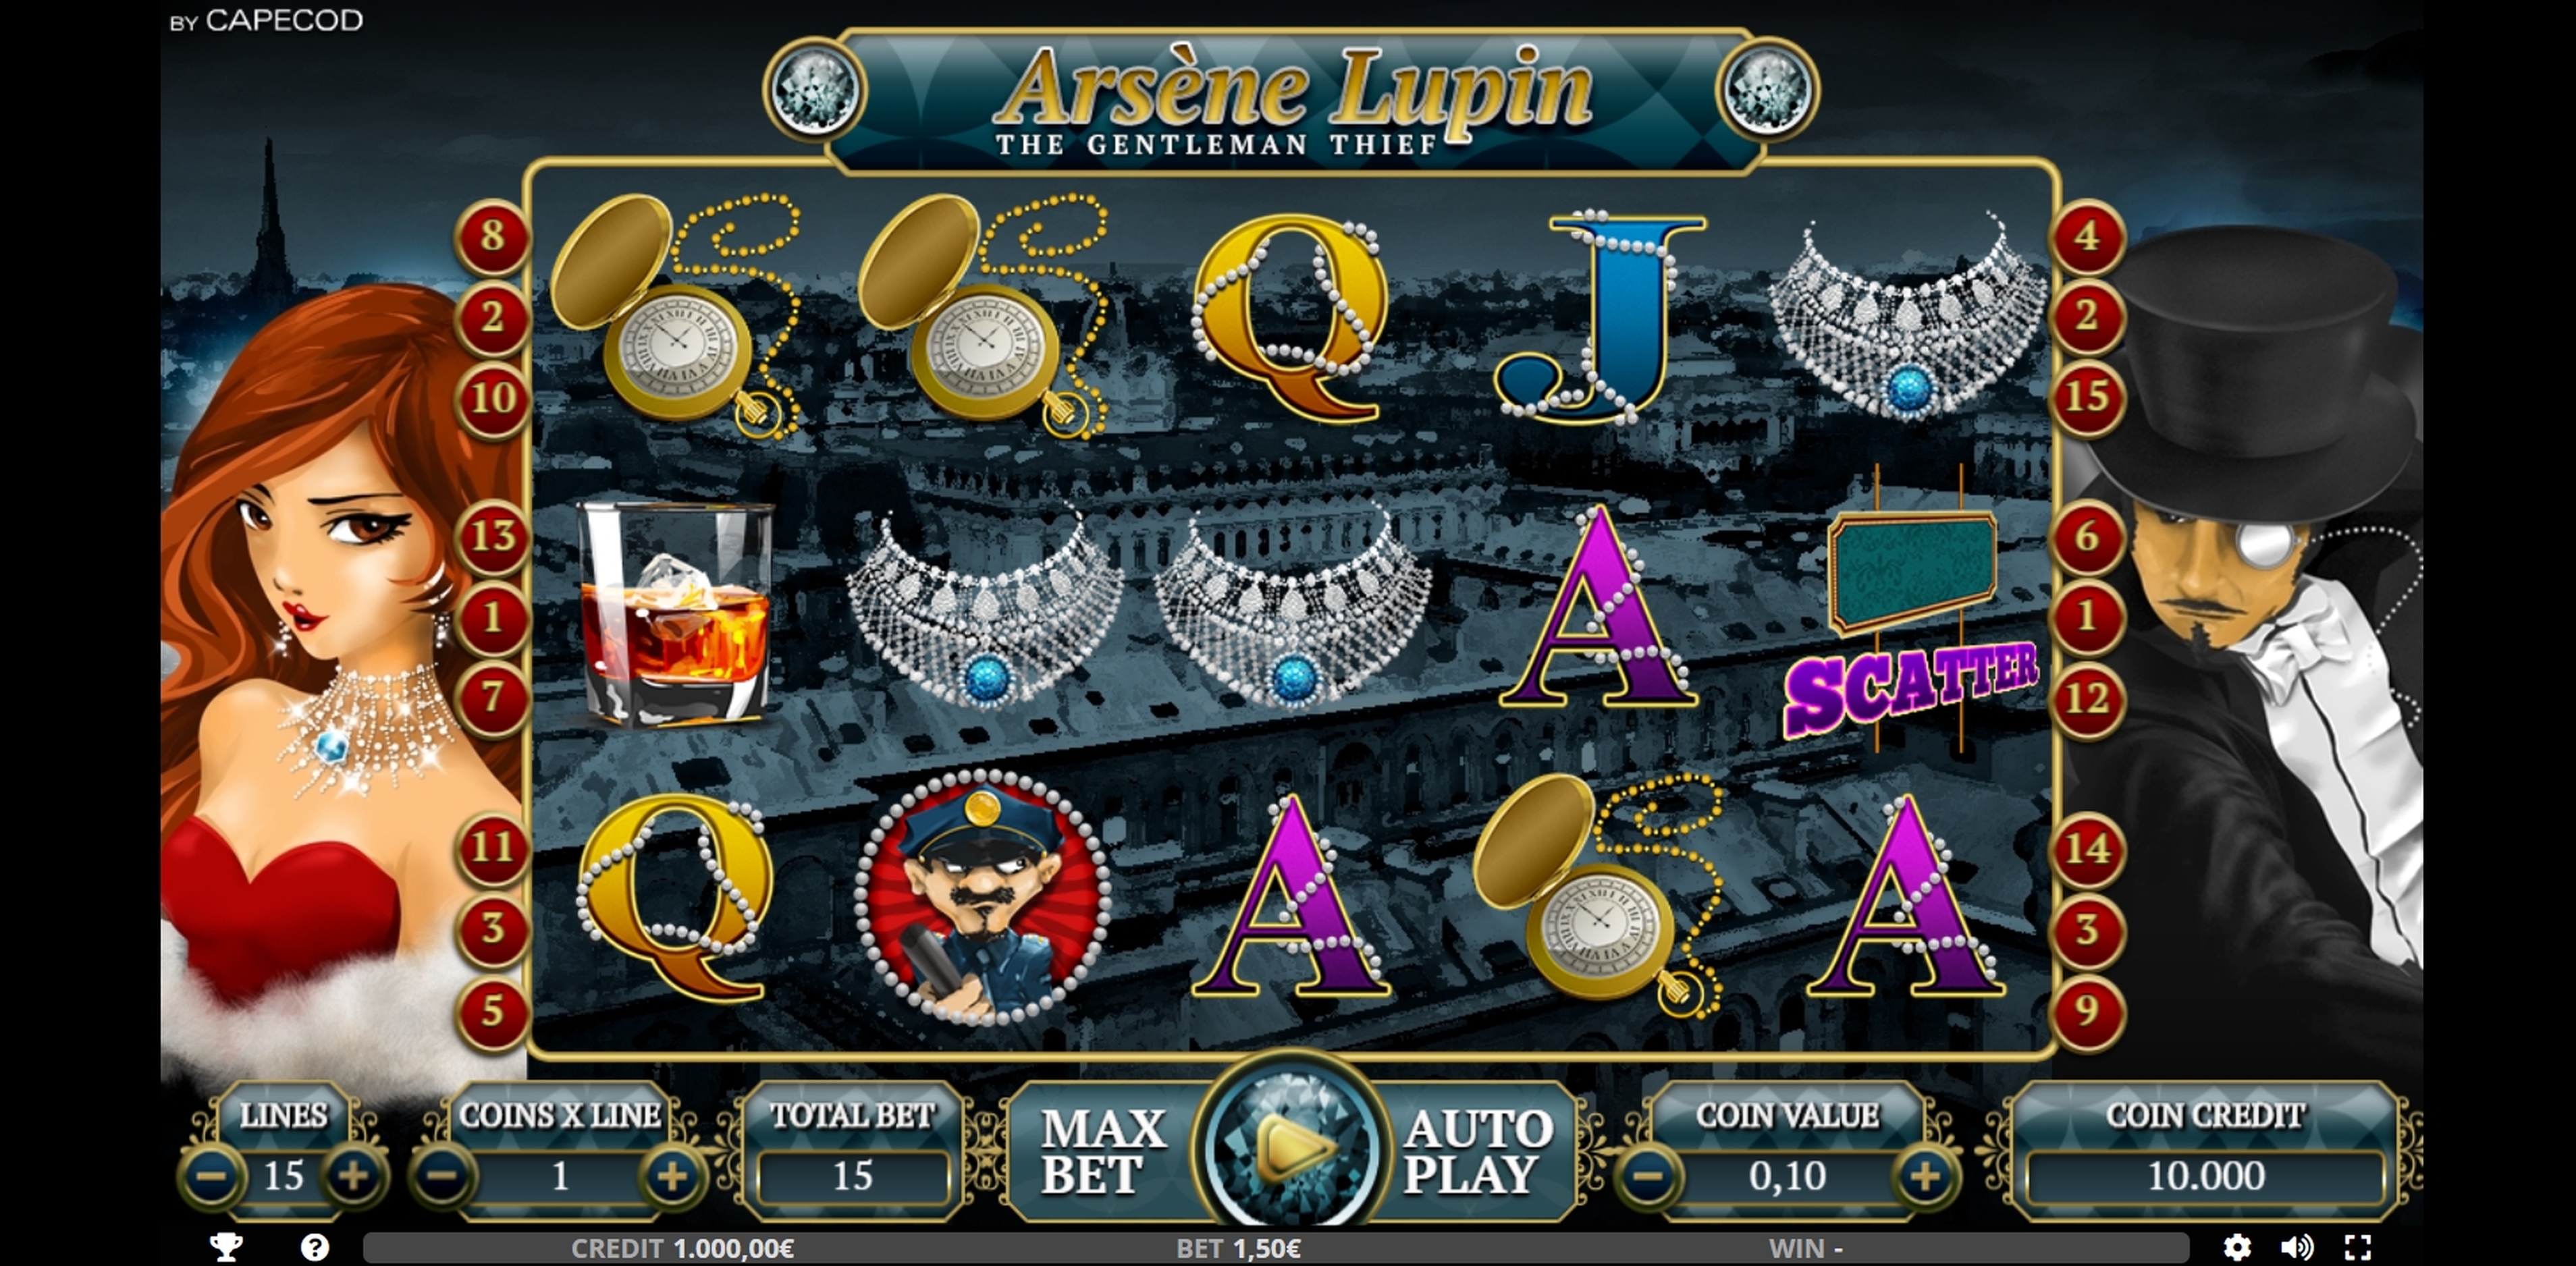 Reels in Arsène Lupin Slot Game by Capecod Gaming